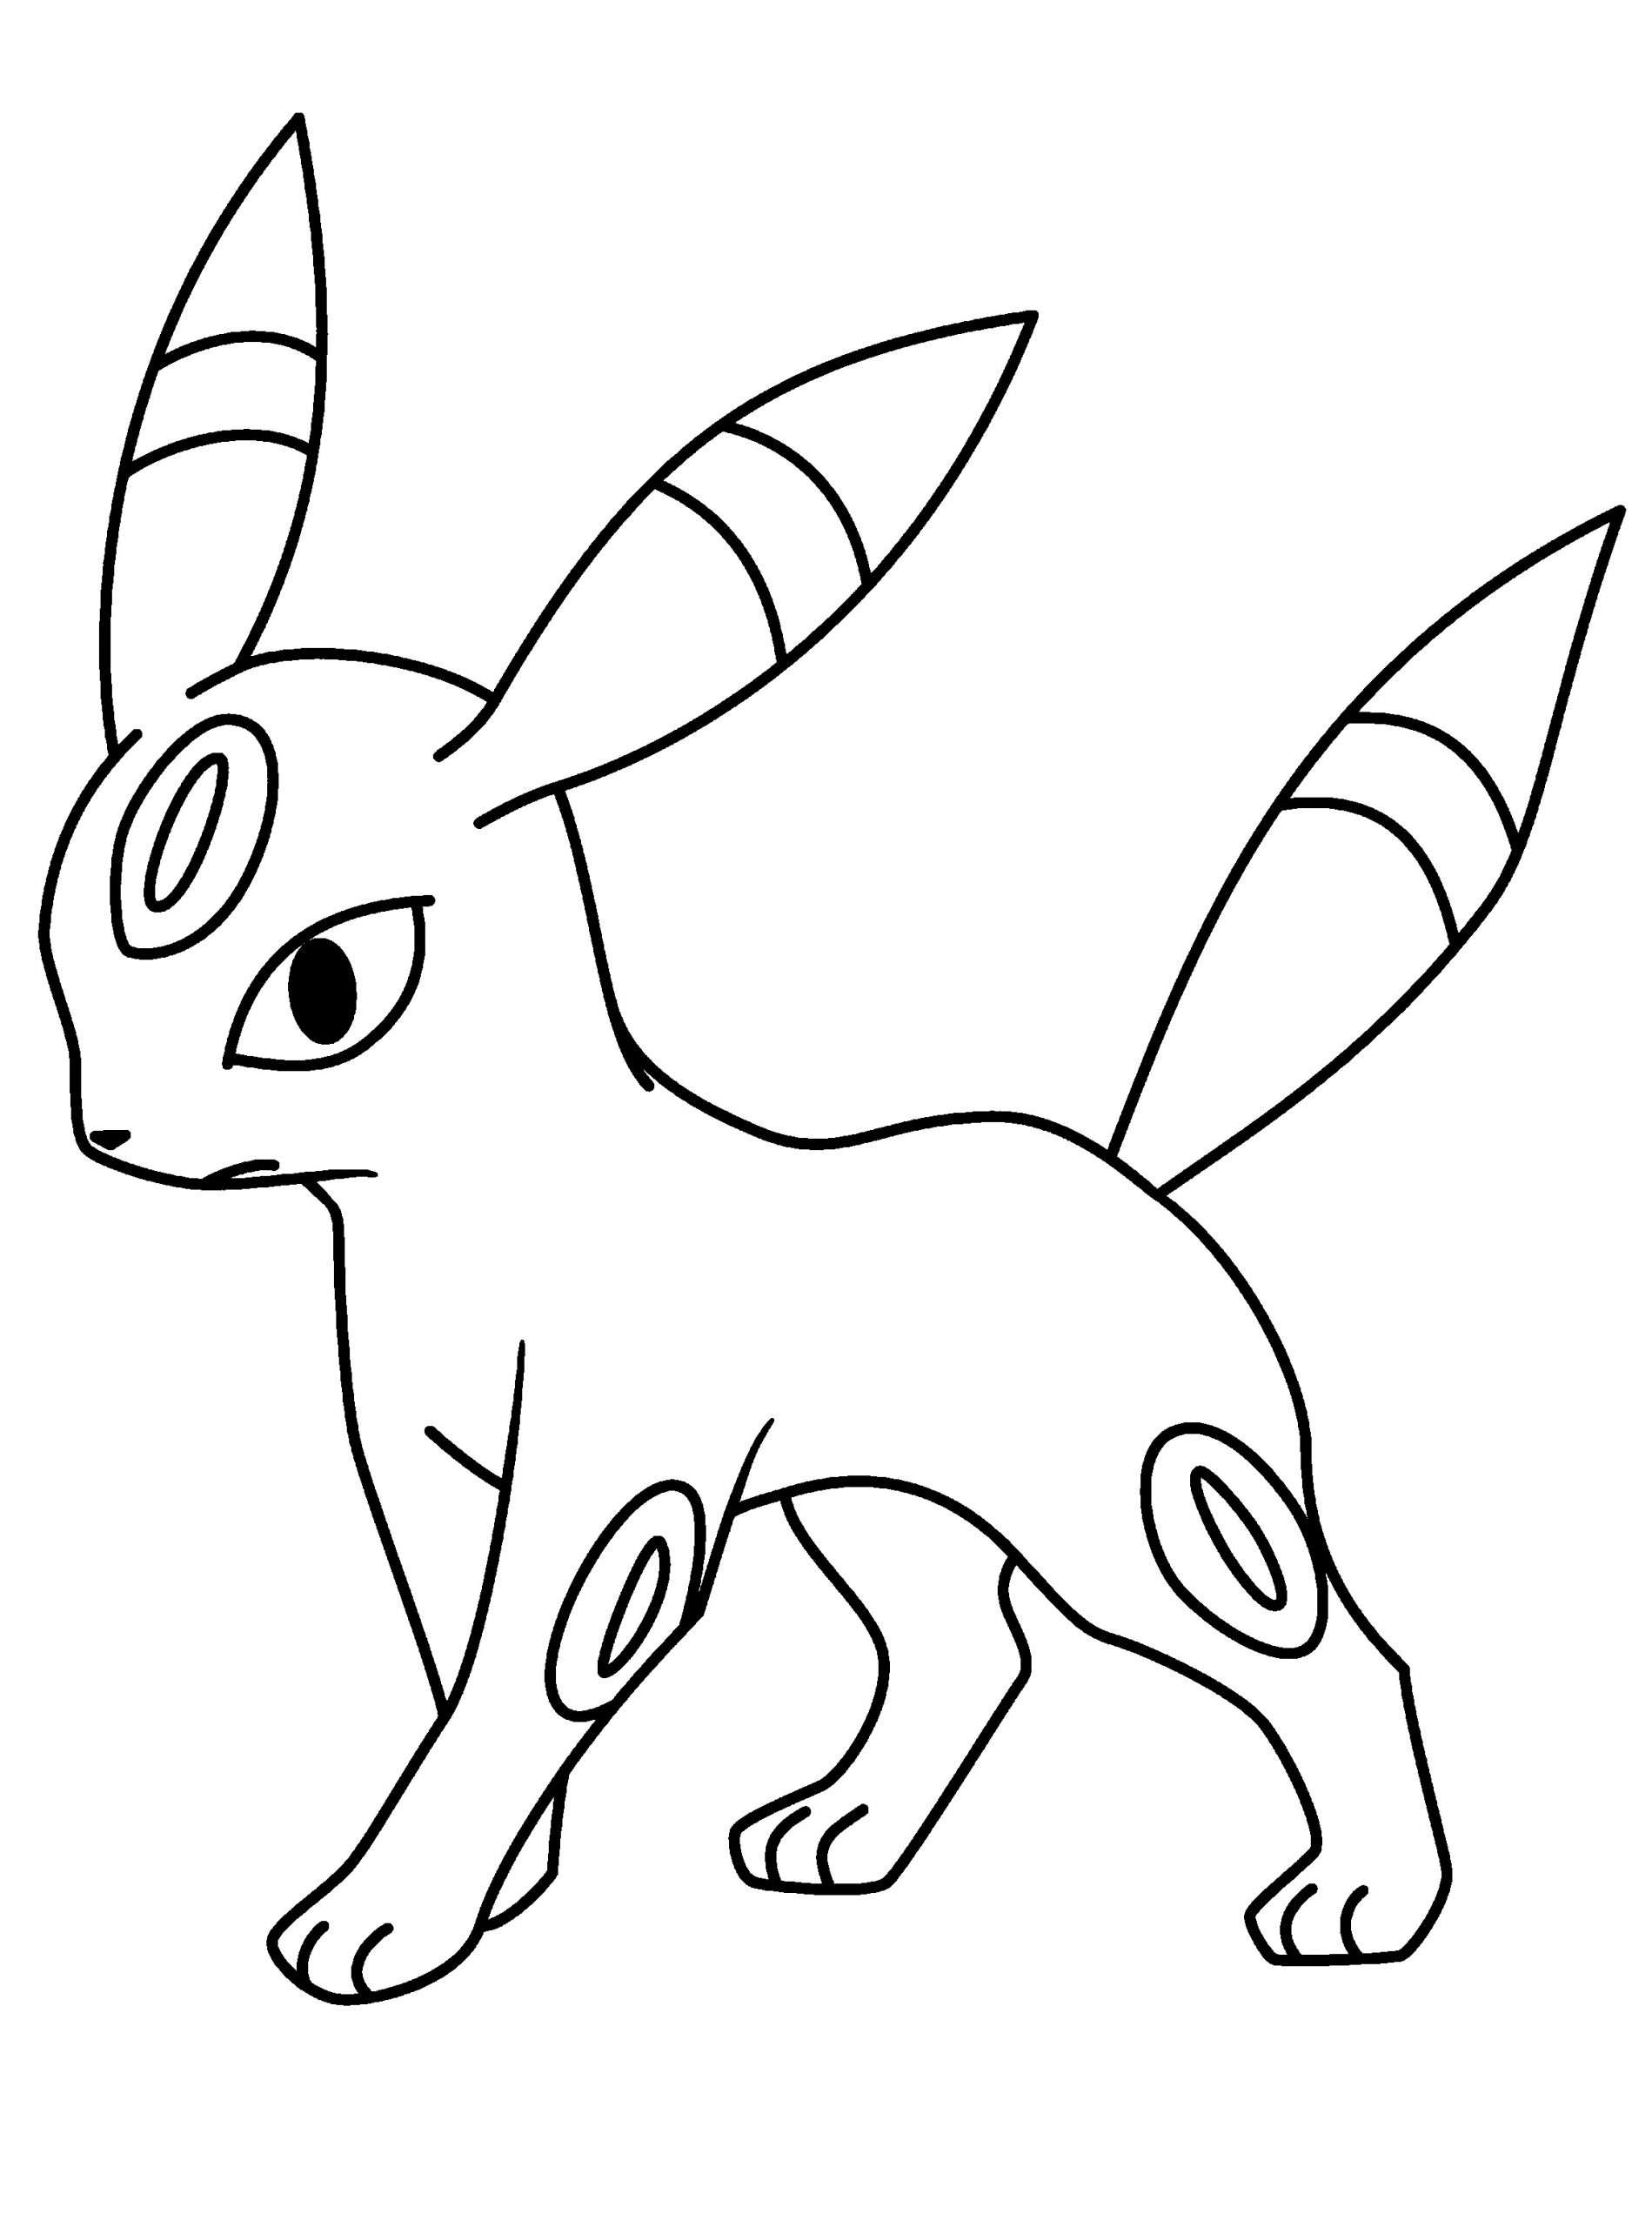 55 Pokemon Coloring Pages For Kids